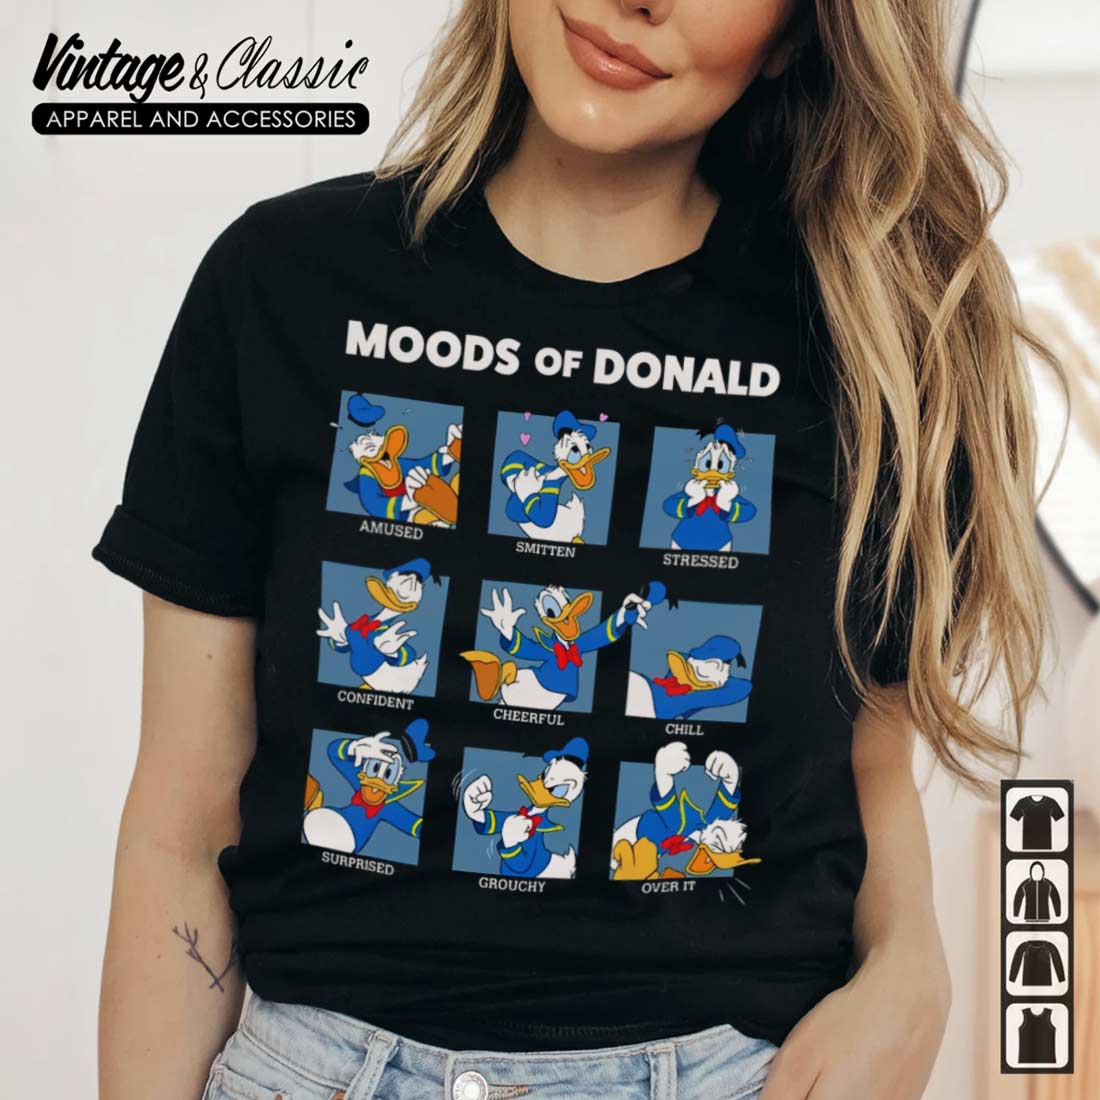 - Vintagenclassic Funny Tee Face Donald Duck, Of Donald Shirt Moods